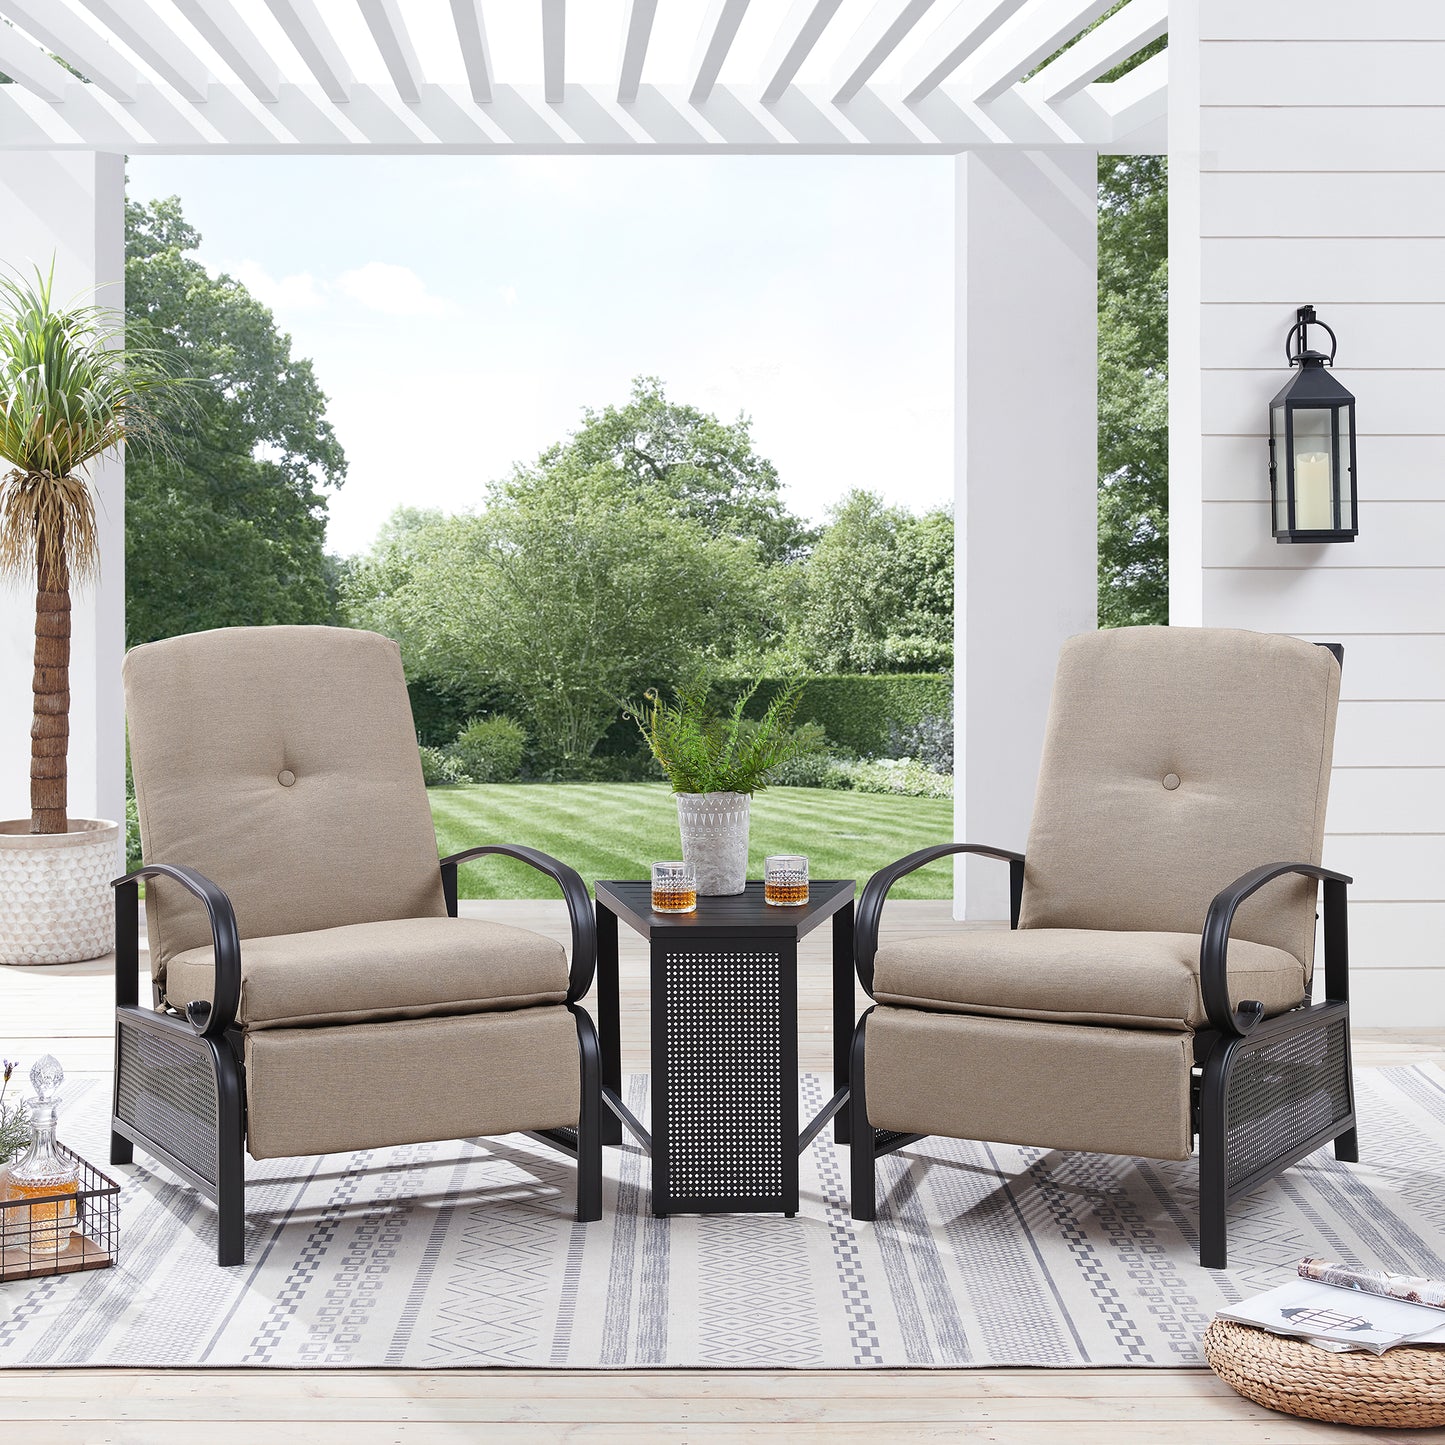 Ulax Furniture 2-Person Conversation set Seating Group with Recliner Chairs and Metal End Table (Sailcloth Beige)